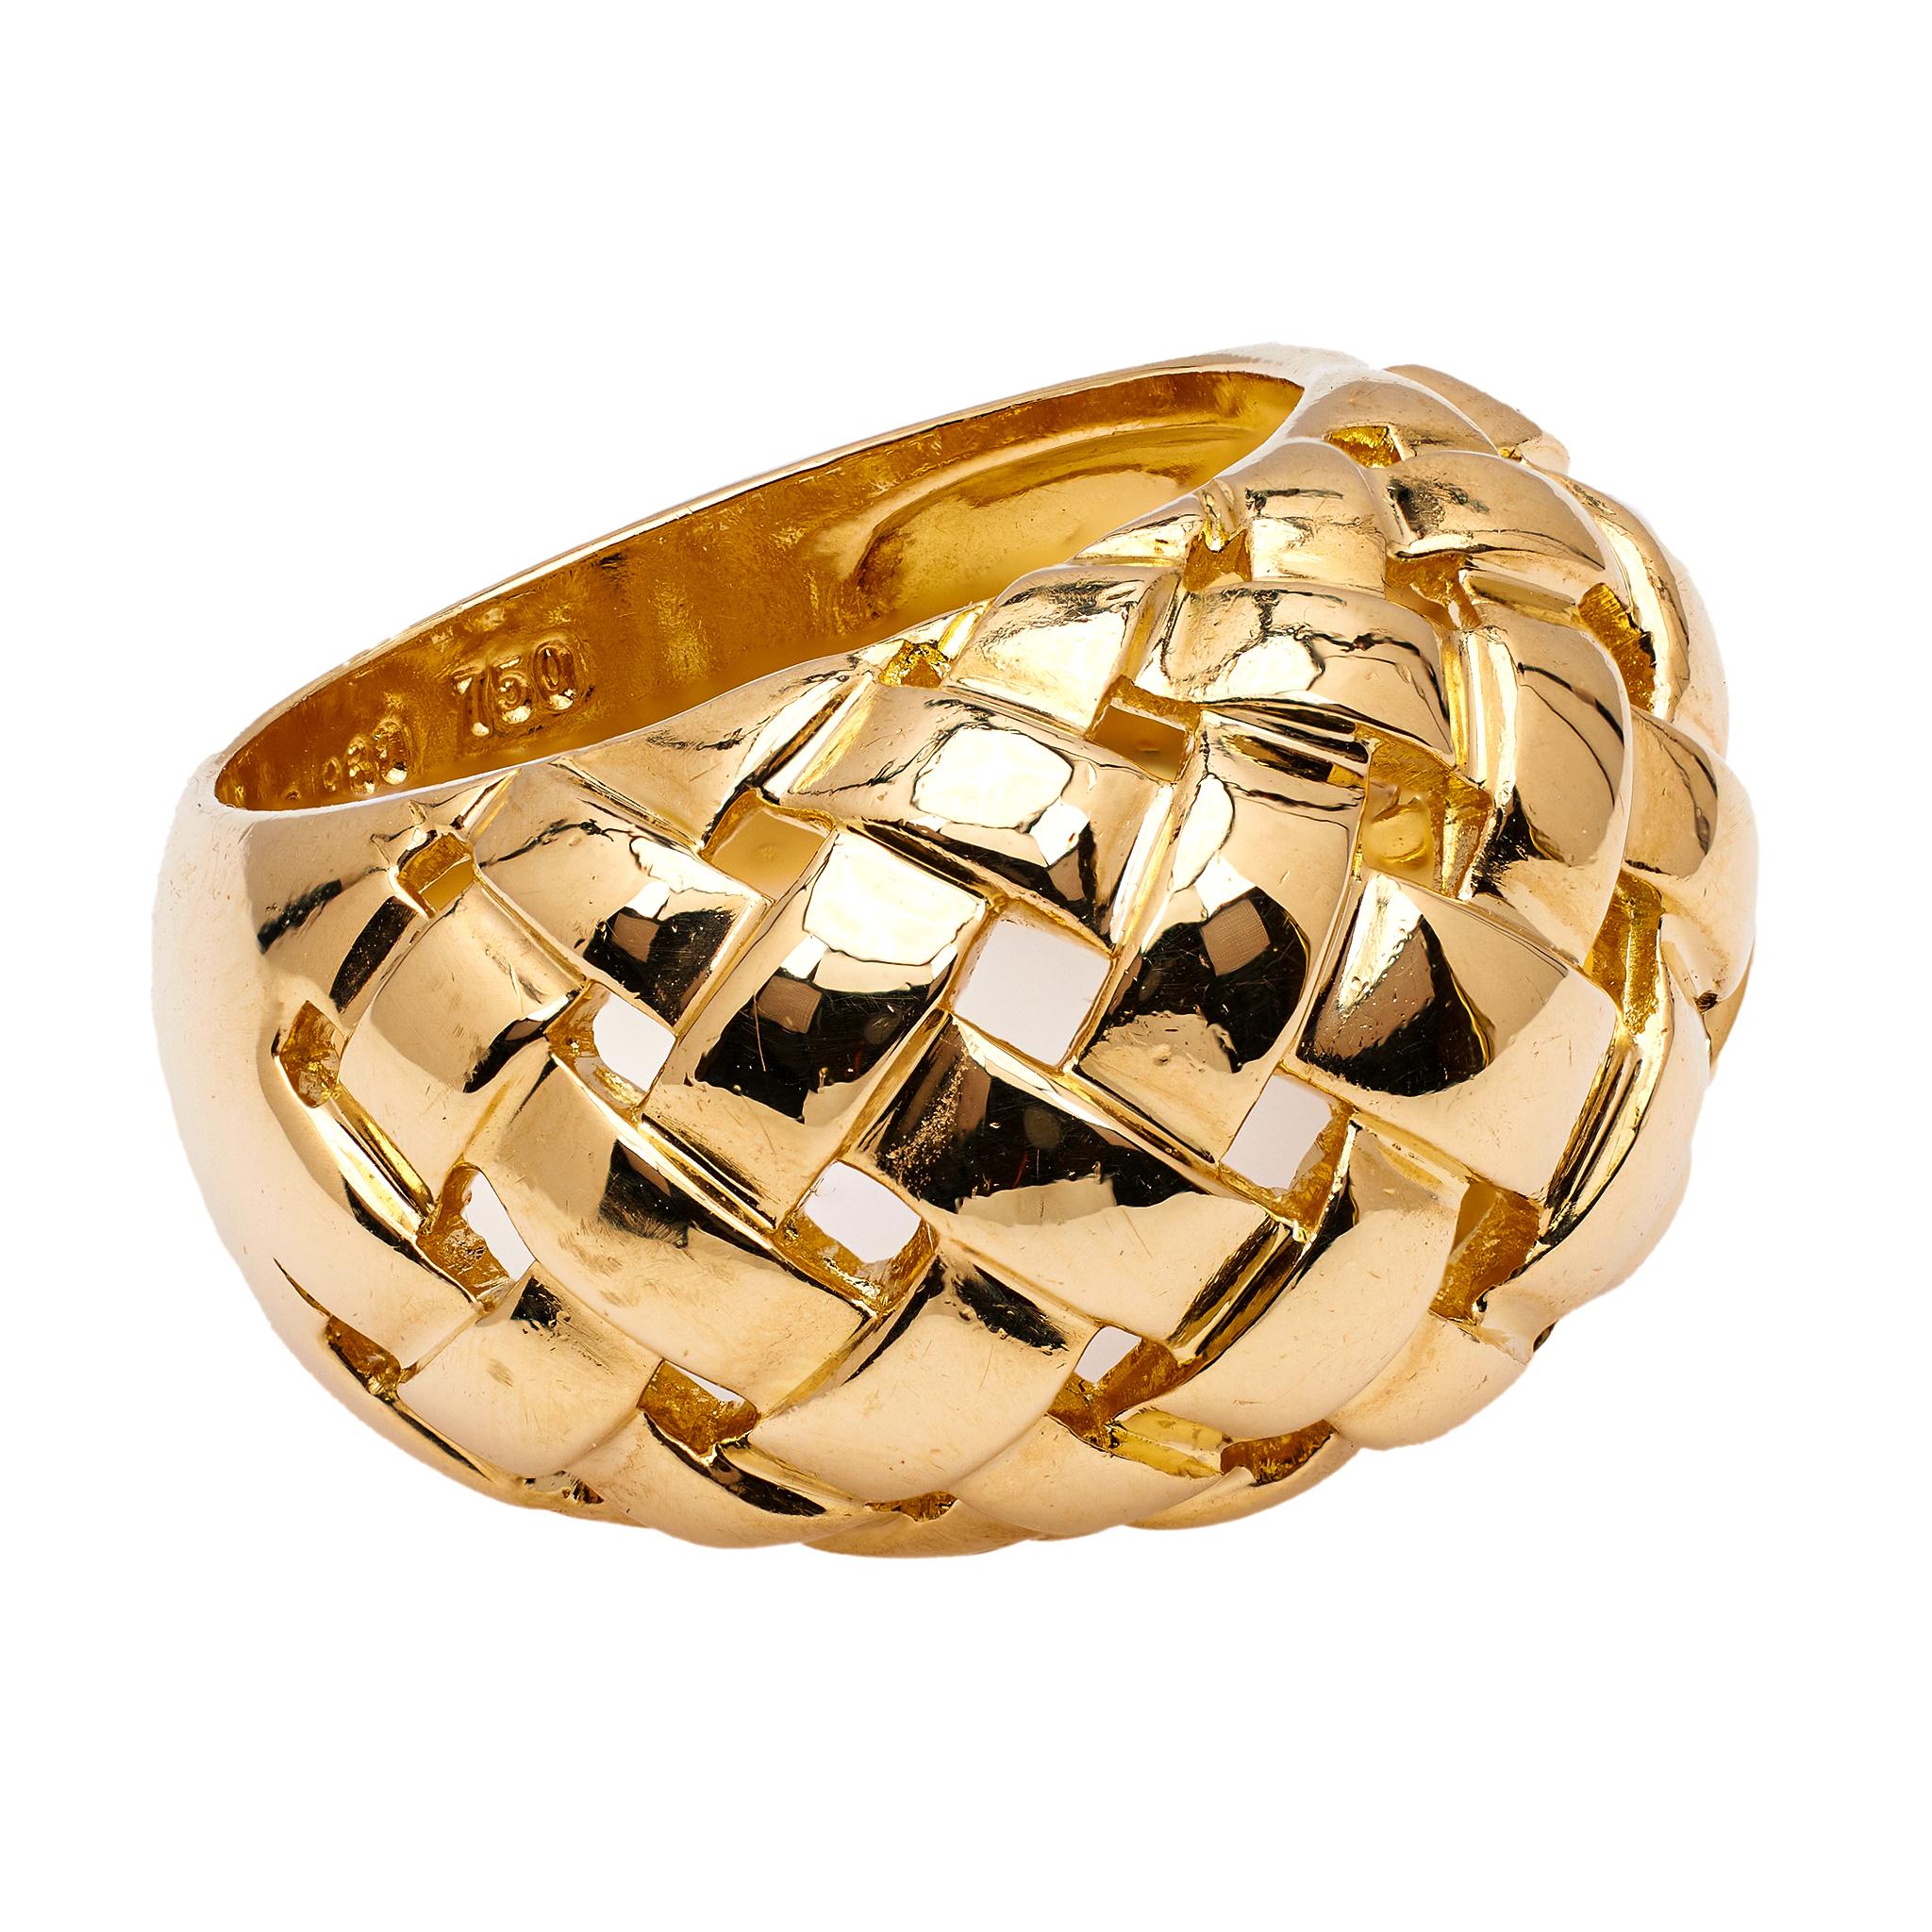 Vintage Tiffany & Co. 18k Yellow Gold Woven Dome Ring 1